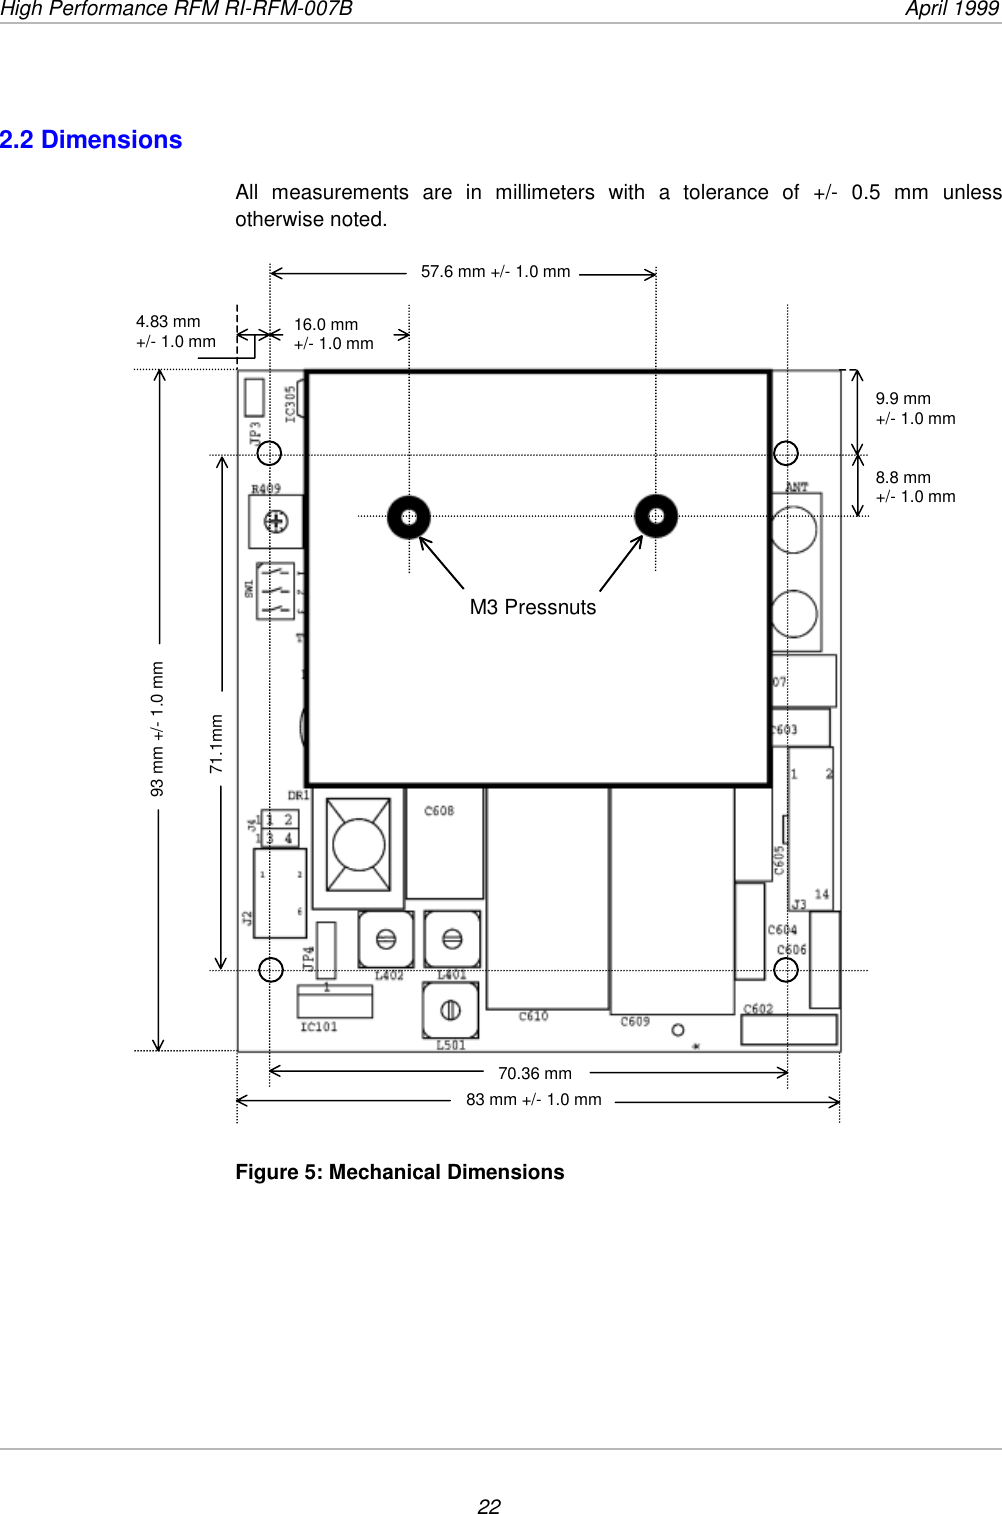 High Performance RFM RI-RFM-007B  April 1999222.2 DimensionsAll measurements are in millimeters with a tolerance of +/- 0.5 mm unlessotherwise noted.Figure 5: Mechanical Dimensions8.8 mm+/- 1.0 mm9.9 mm+/- 1.0 mm70.36 mm  83 mm +/- 1.0 mm57.6 mm +/- 1.0 mm16.0 mm+/- 1.0 mm93 mm +/- 1.0 mm71.1mm4.83 mm+/- 1.0 mmM3 Pressnuts